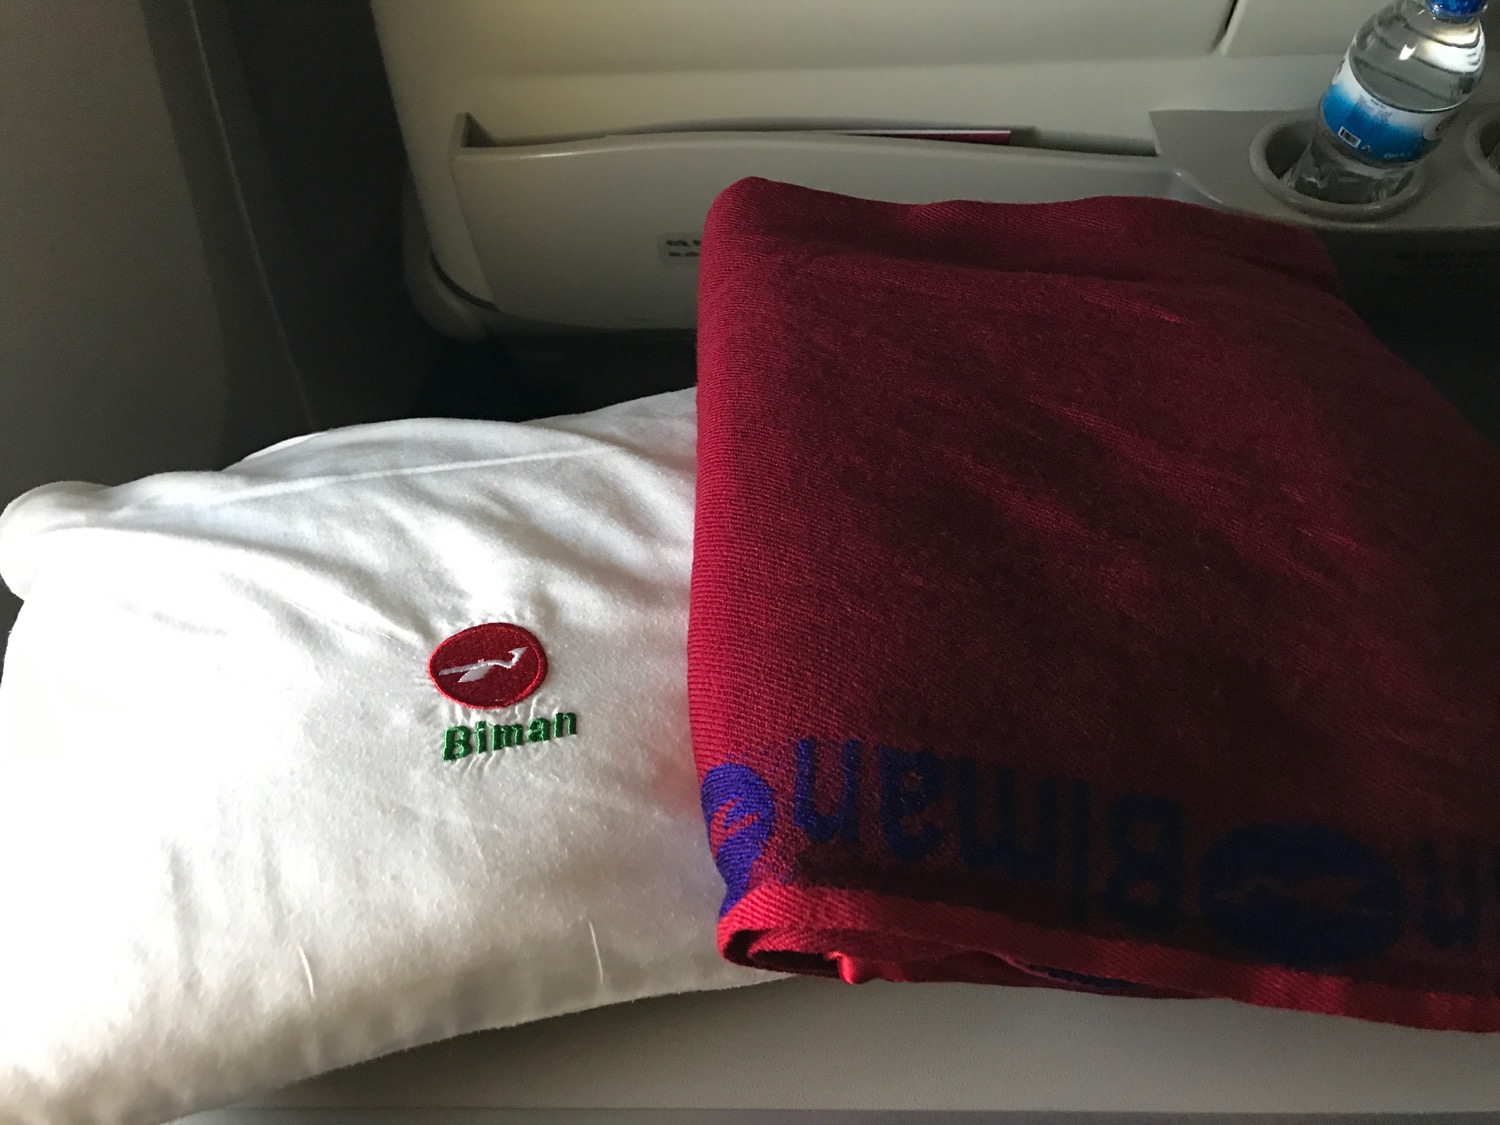 a white pillow and red blanket on a plane